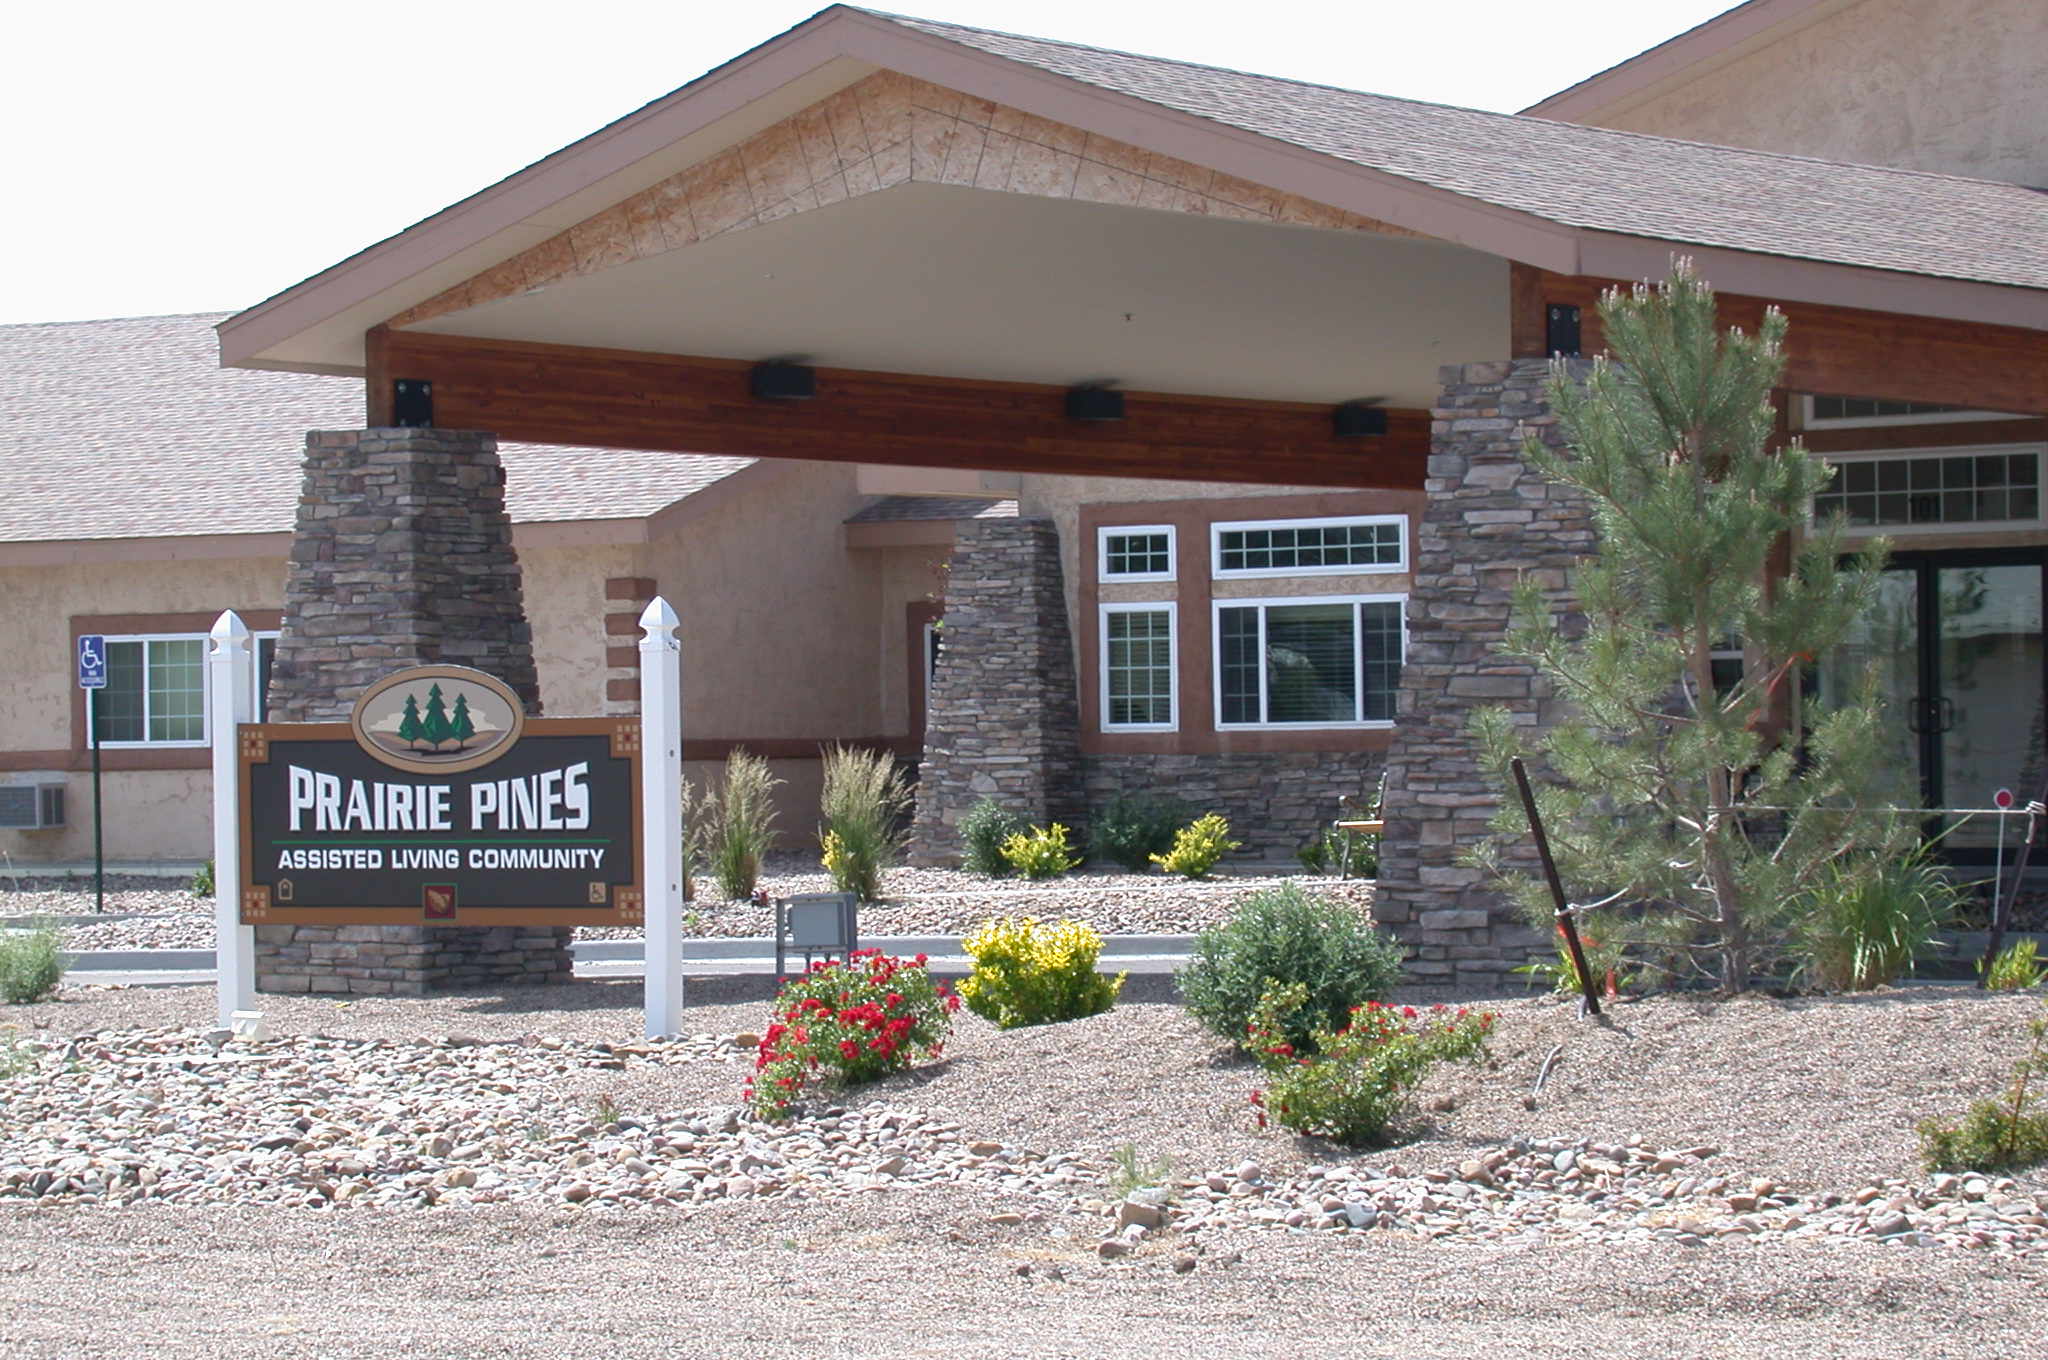 Prairie Pines Assisted Living Community